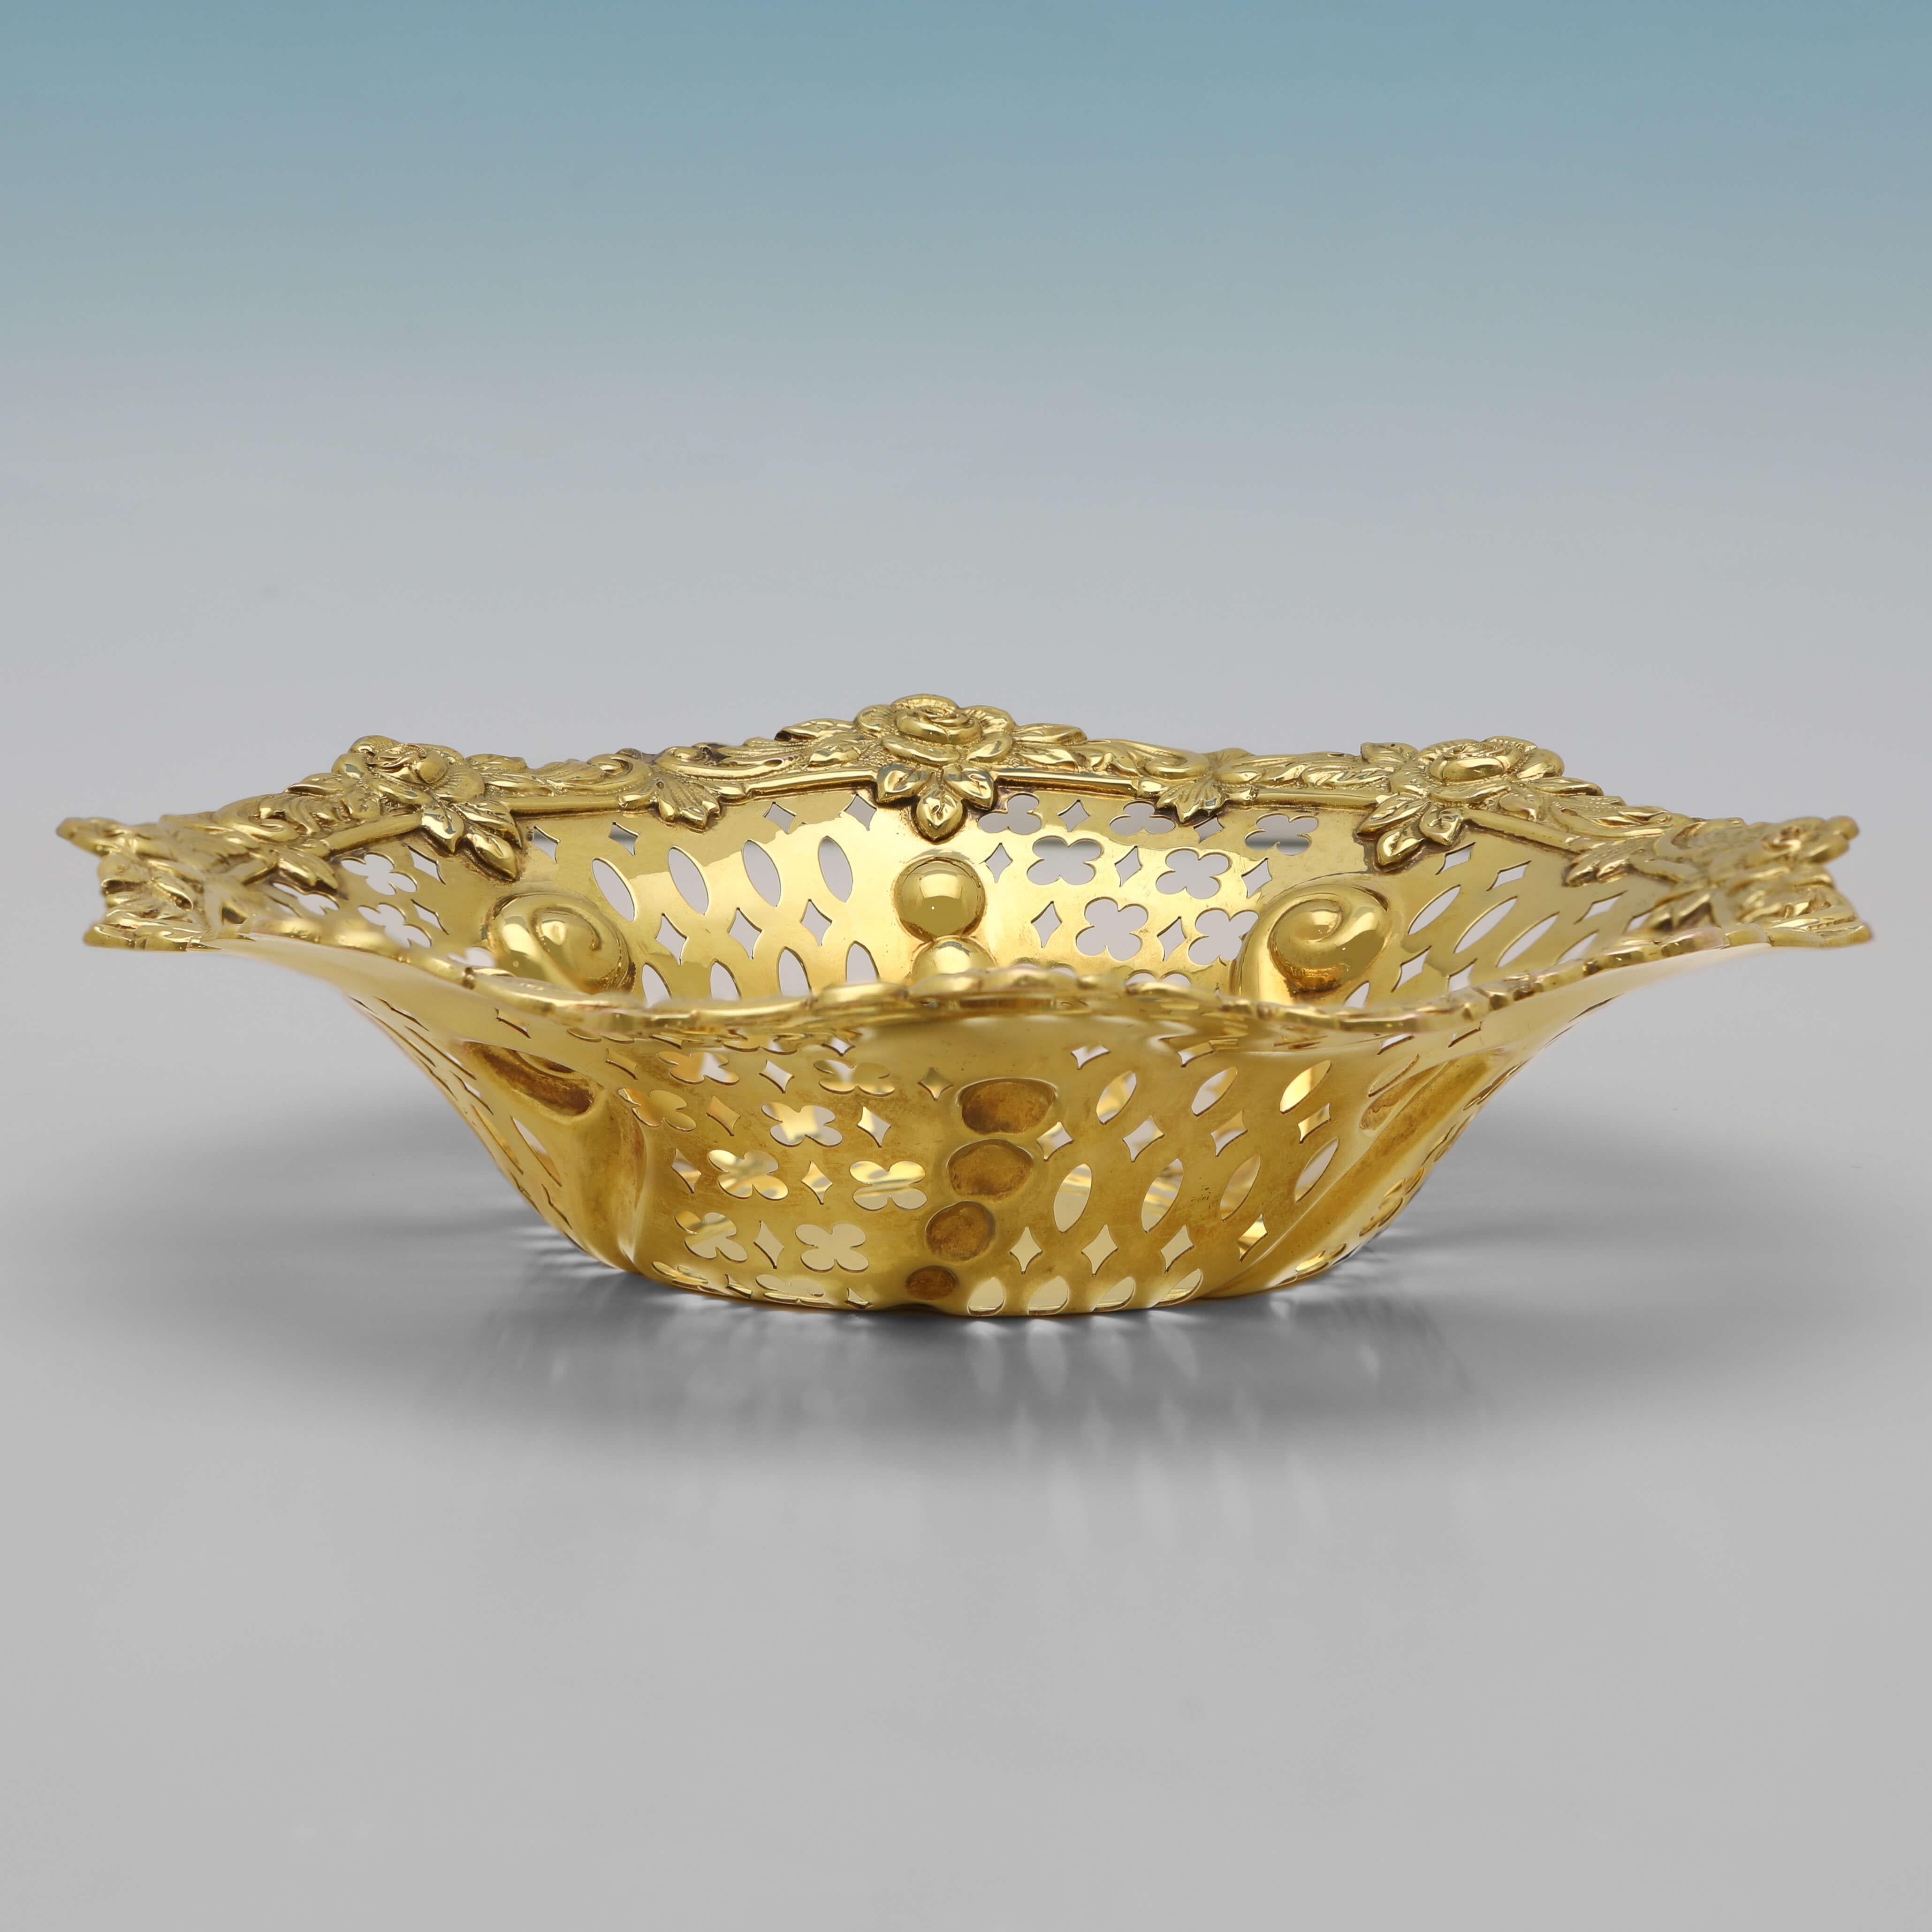 Hallmarked in London in 1903 by Mappin & Webb, this very pretty, Edwardian, Antique 9ct Gold Dish, features pierced sides, and a cast and applied border. 

The dish measures 1.5